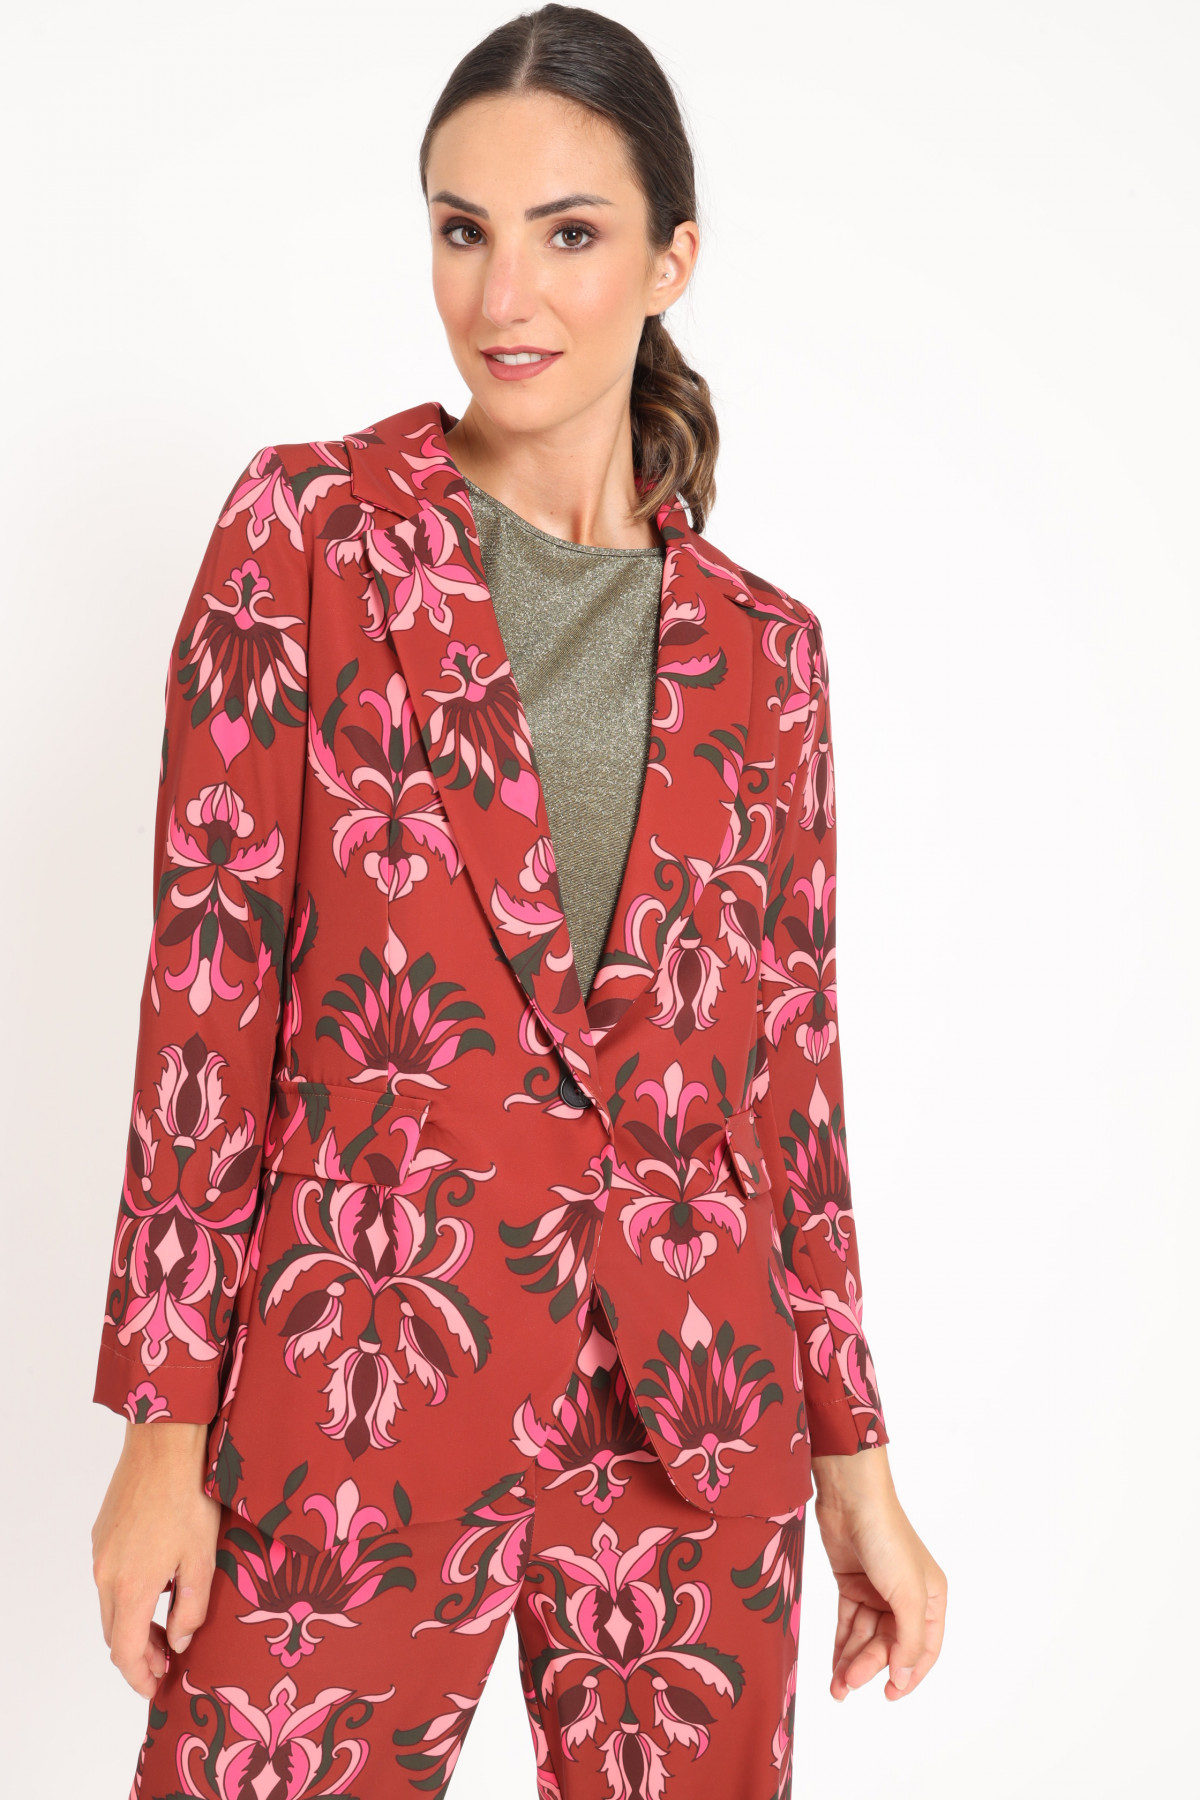 Jacket with Classic Revers in Floral Fantasy Print